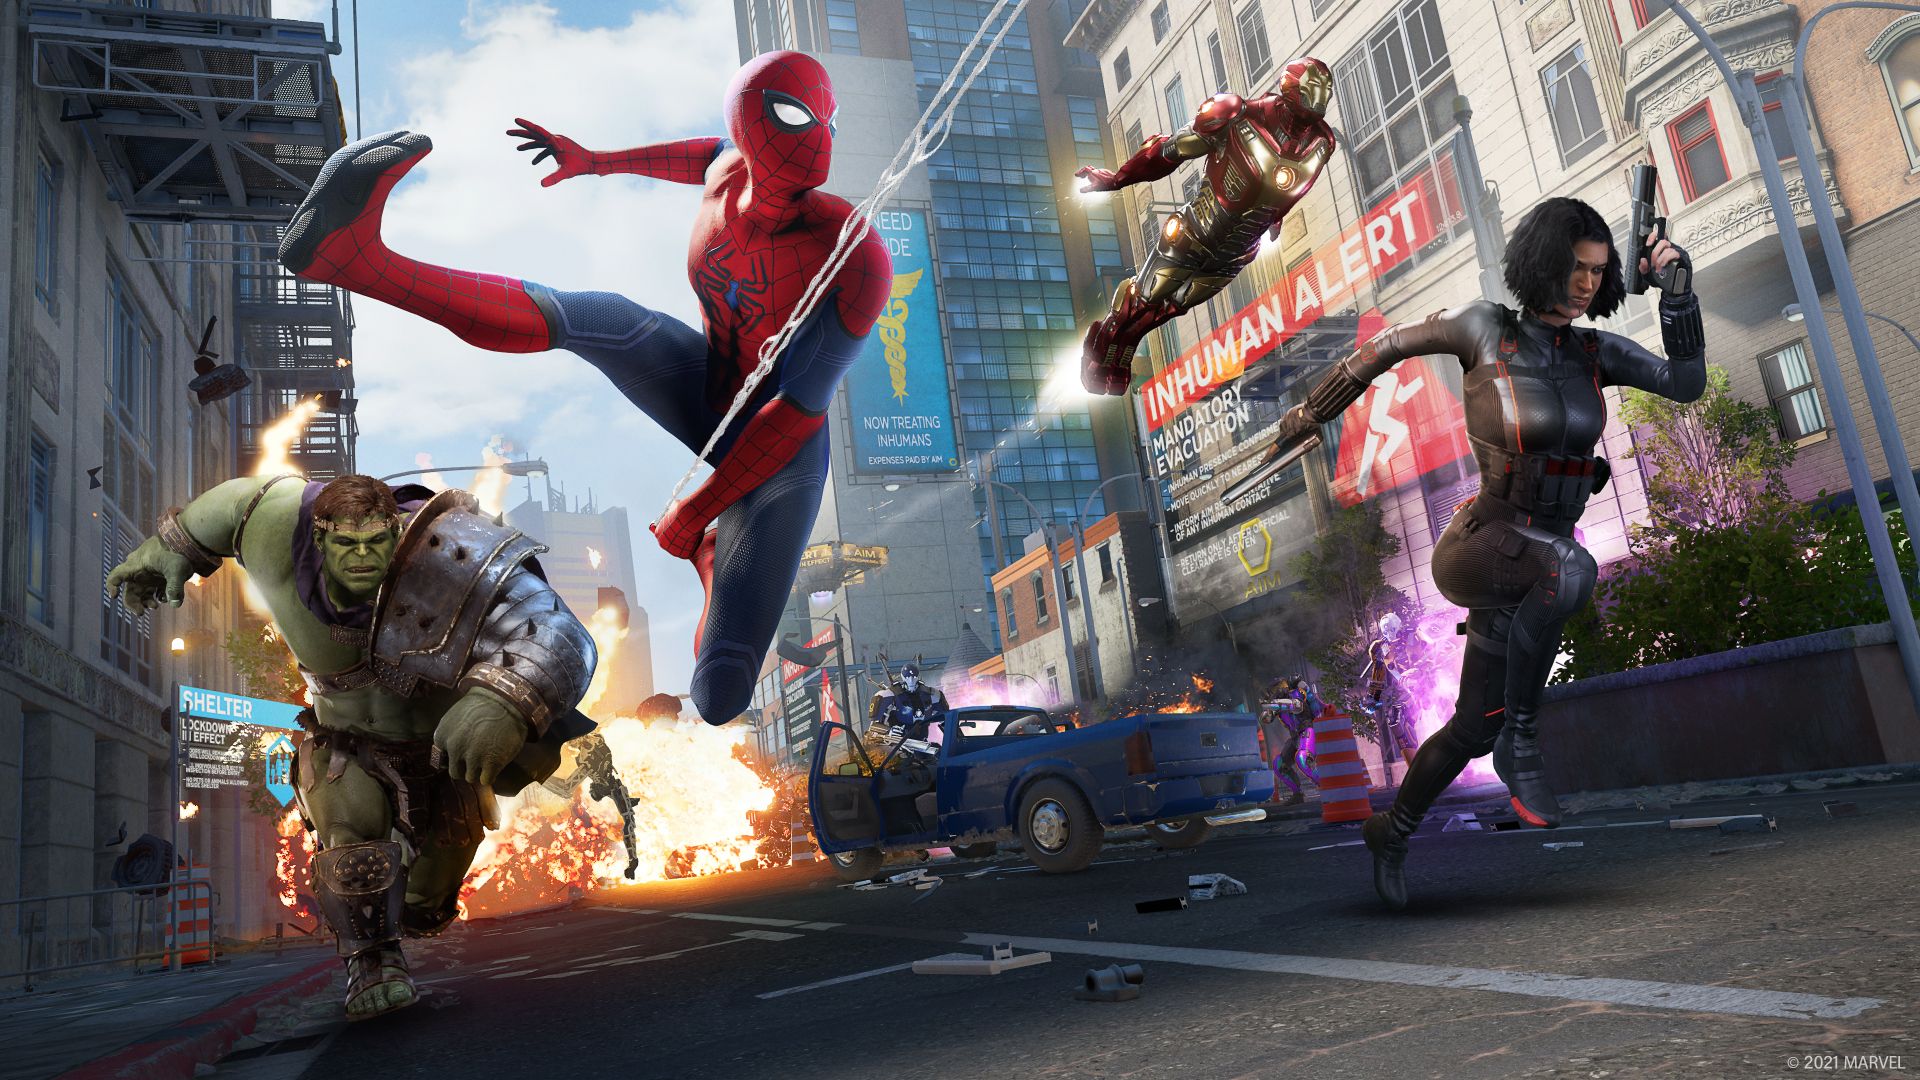 Spider-Man swings into action alongside the Avengers.